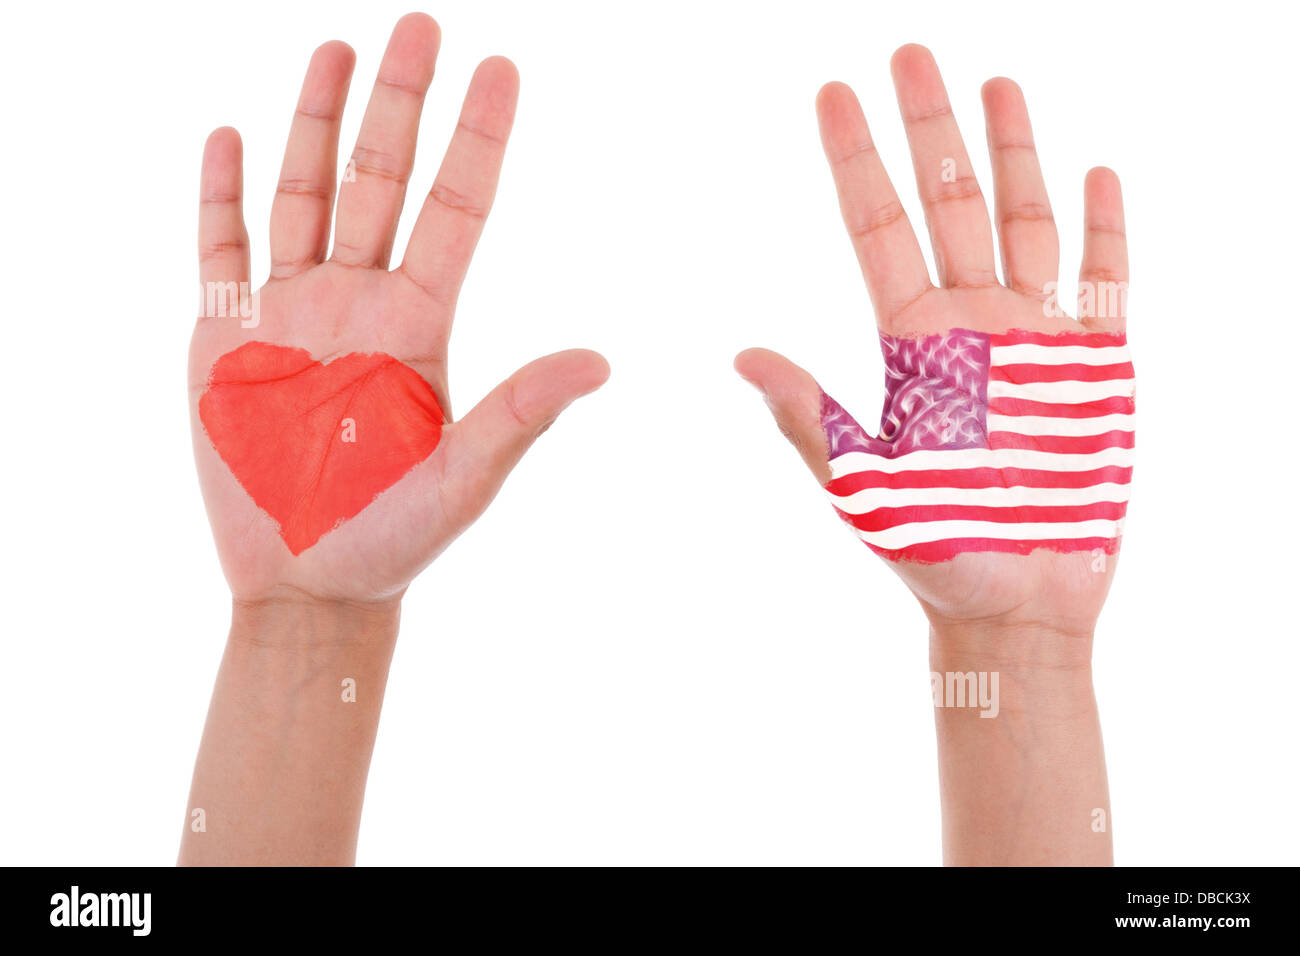 Hands with a painted heart and united states flag, i love usa concept, isolated on white background Stock Photo